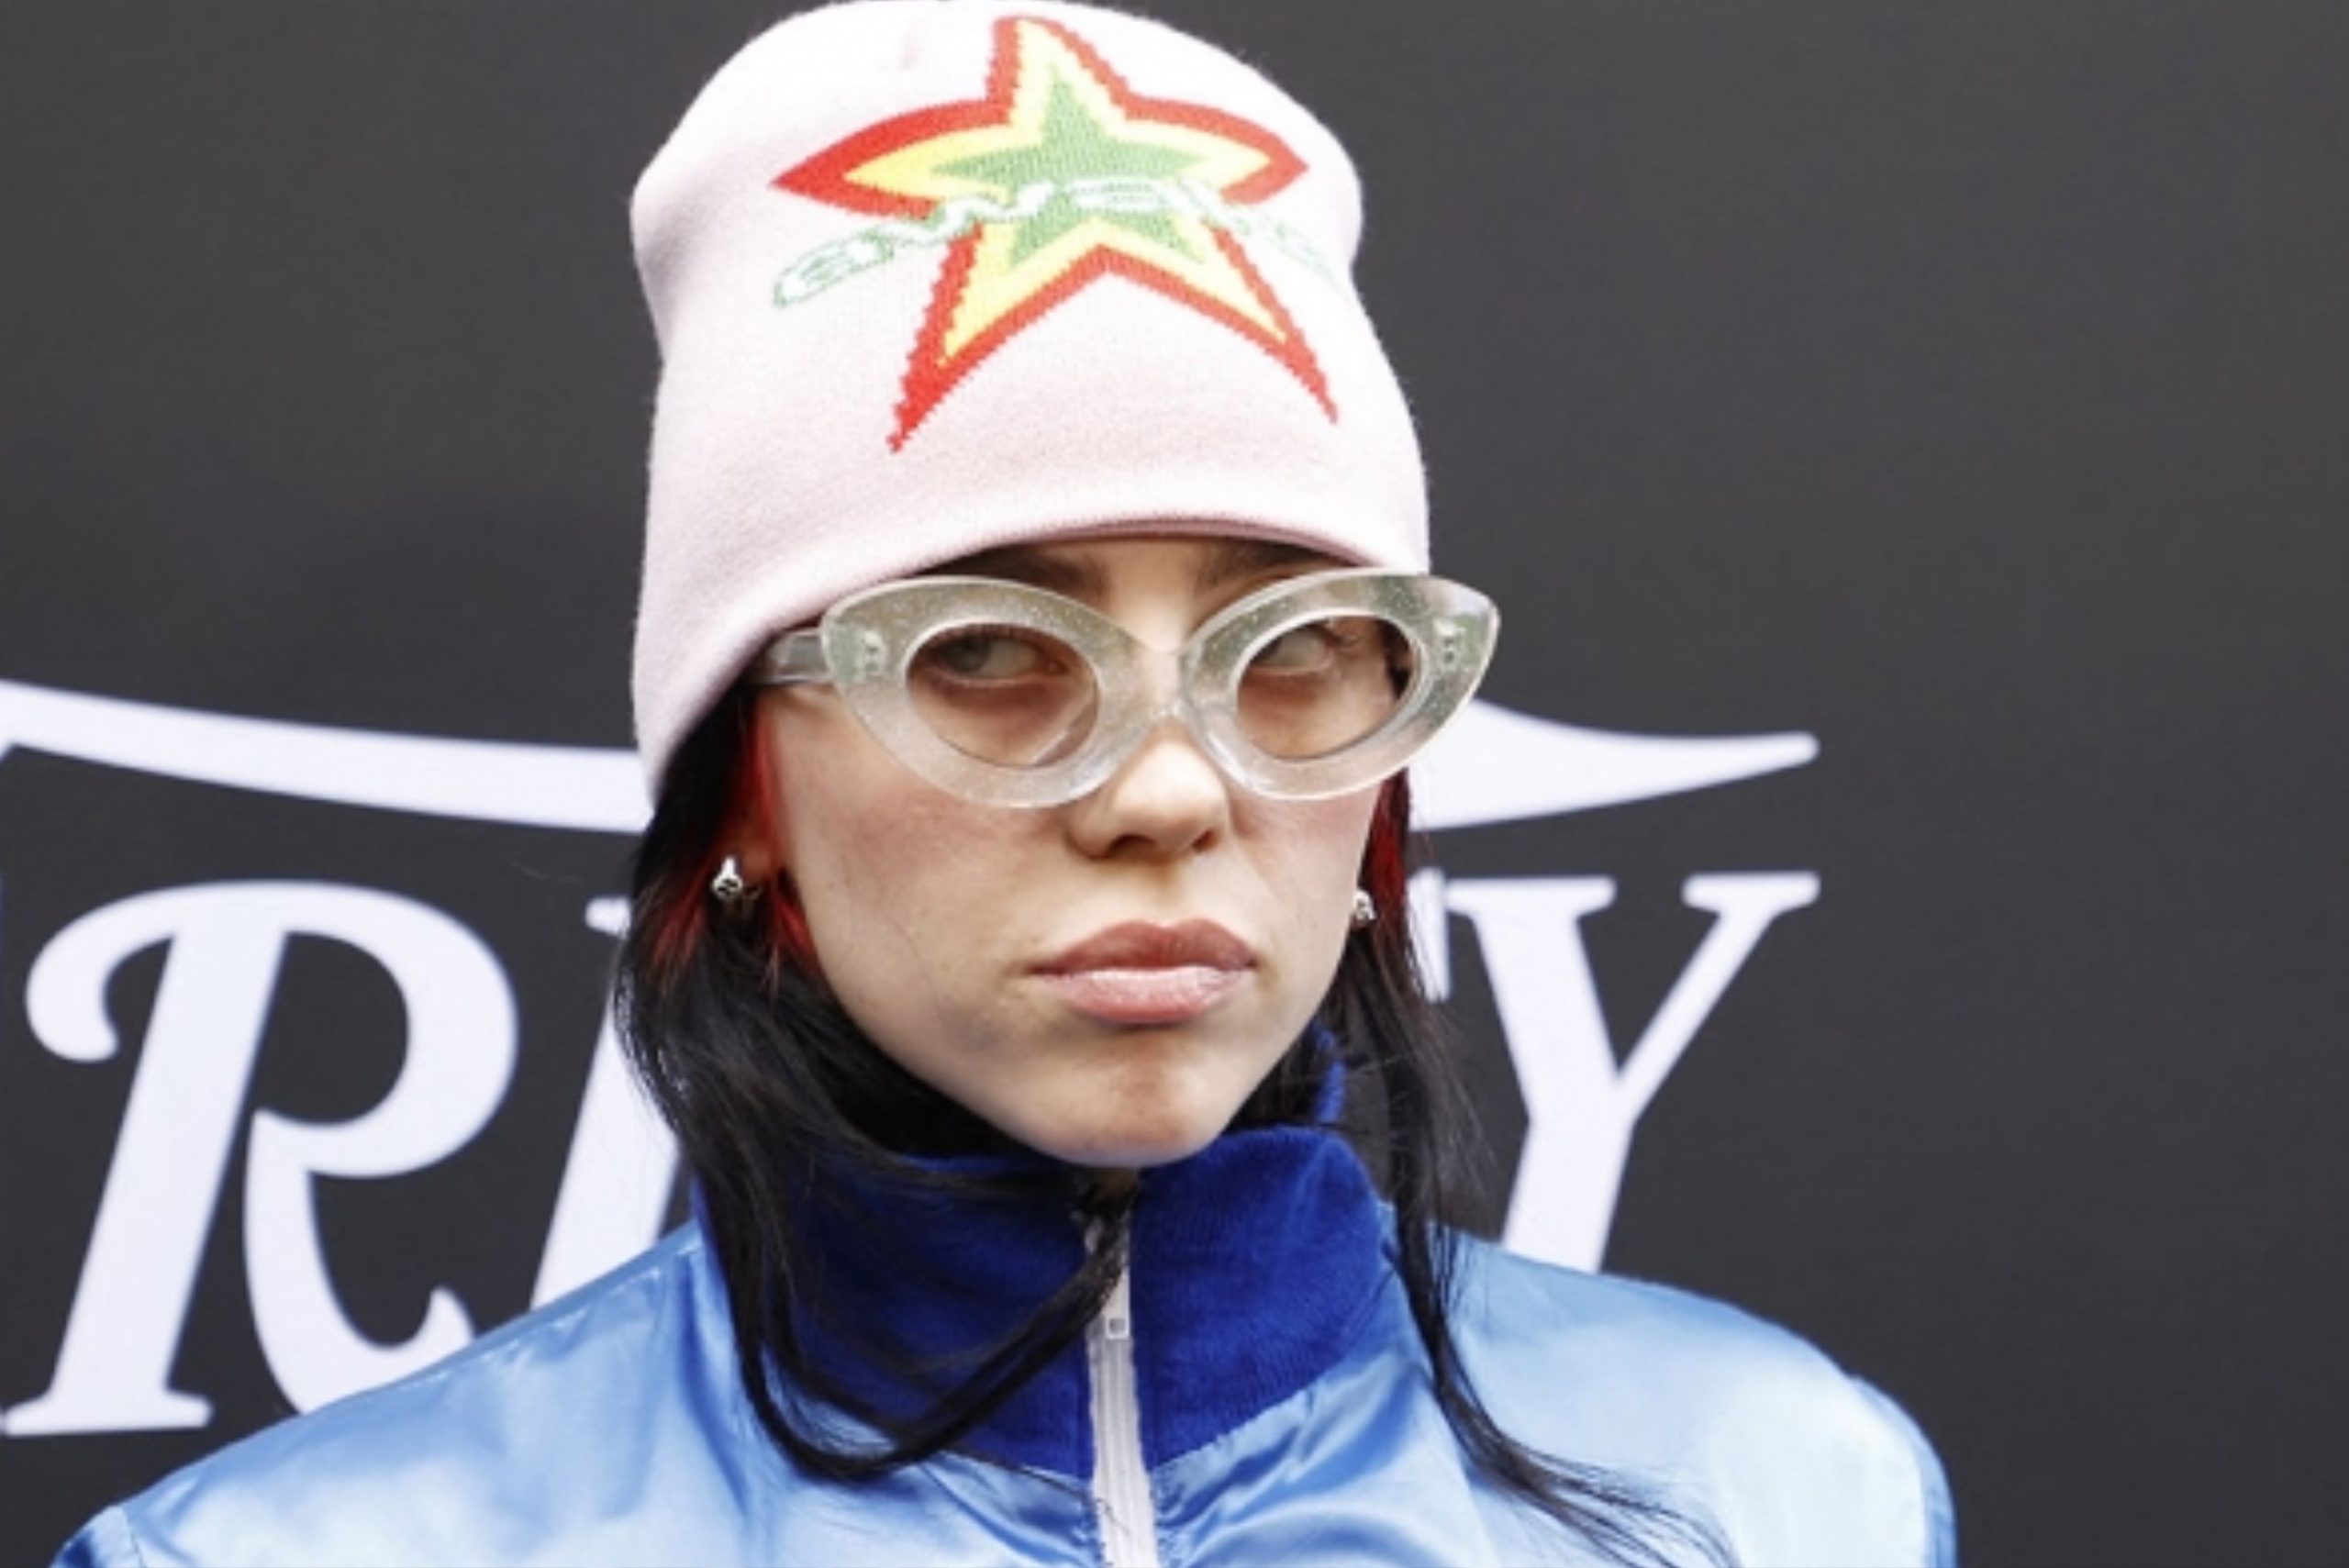 The tumble: after announcing her coming out, Billie Eilish loses&#8230; 100,000 followers on Instagram, Magnate Daily